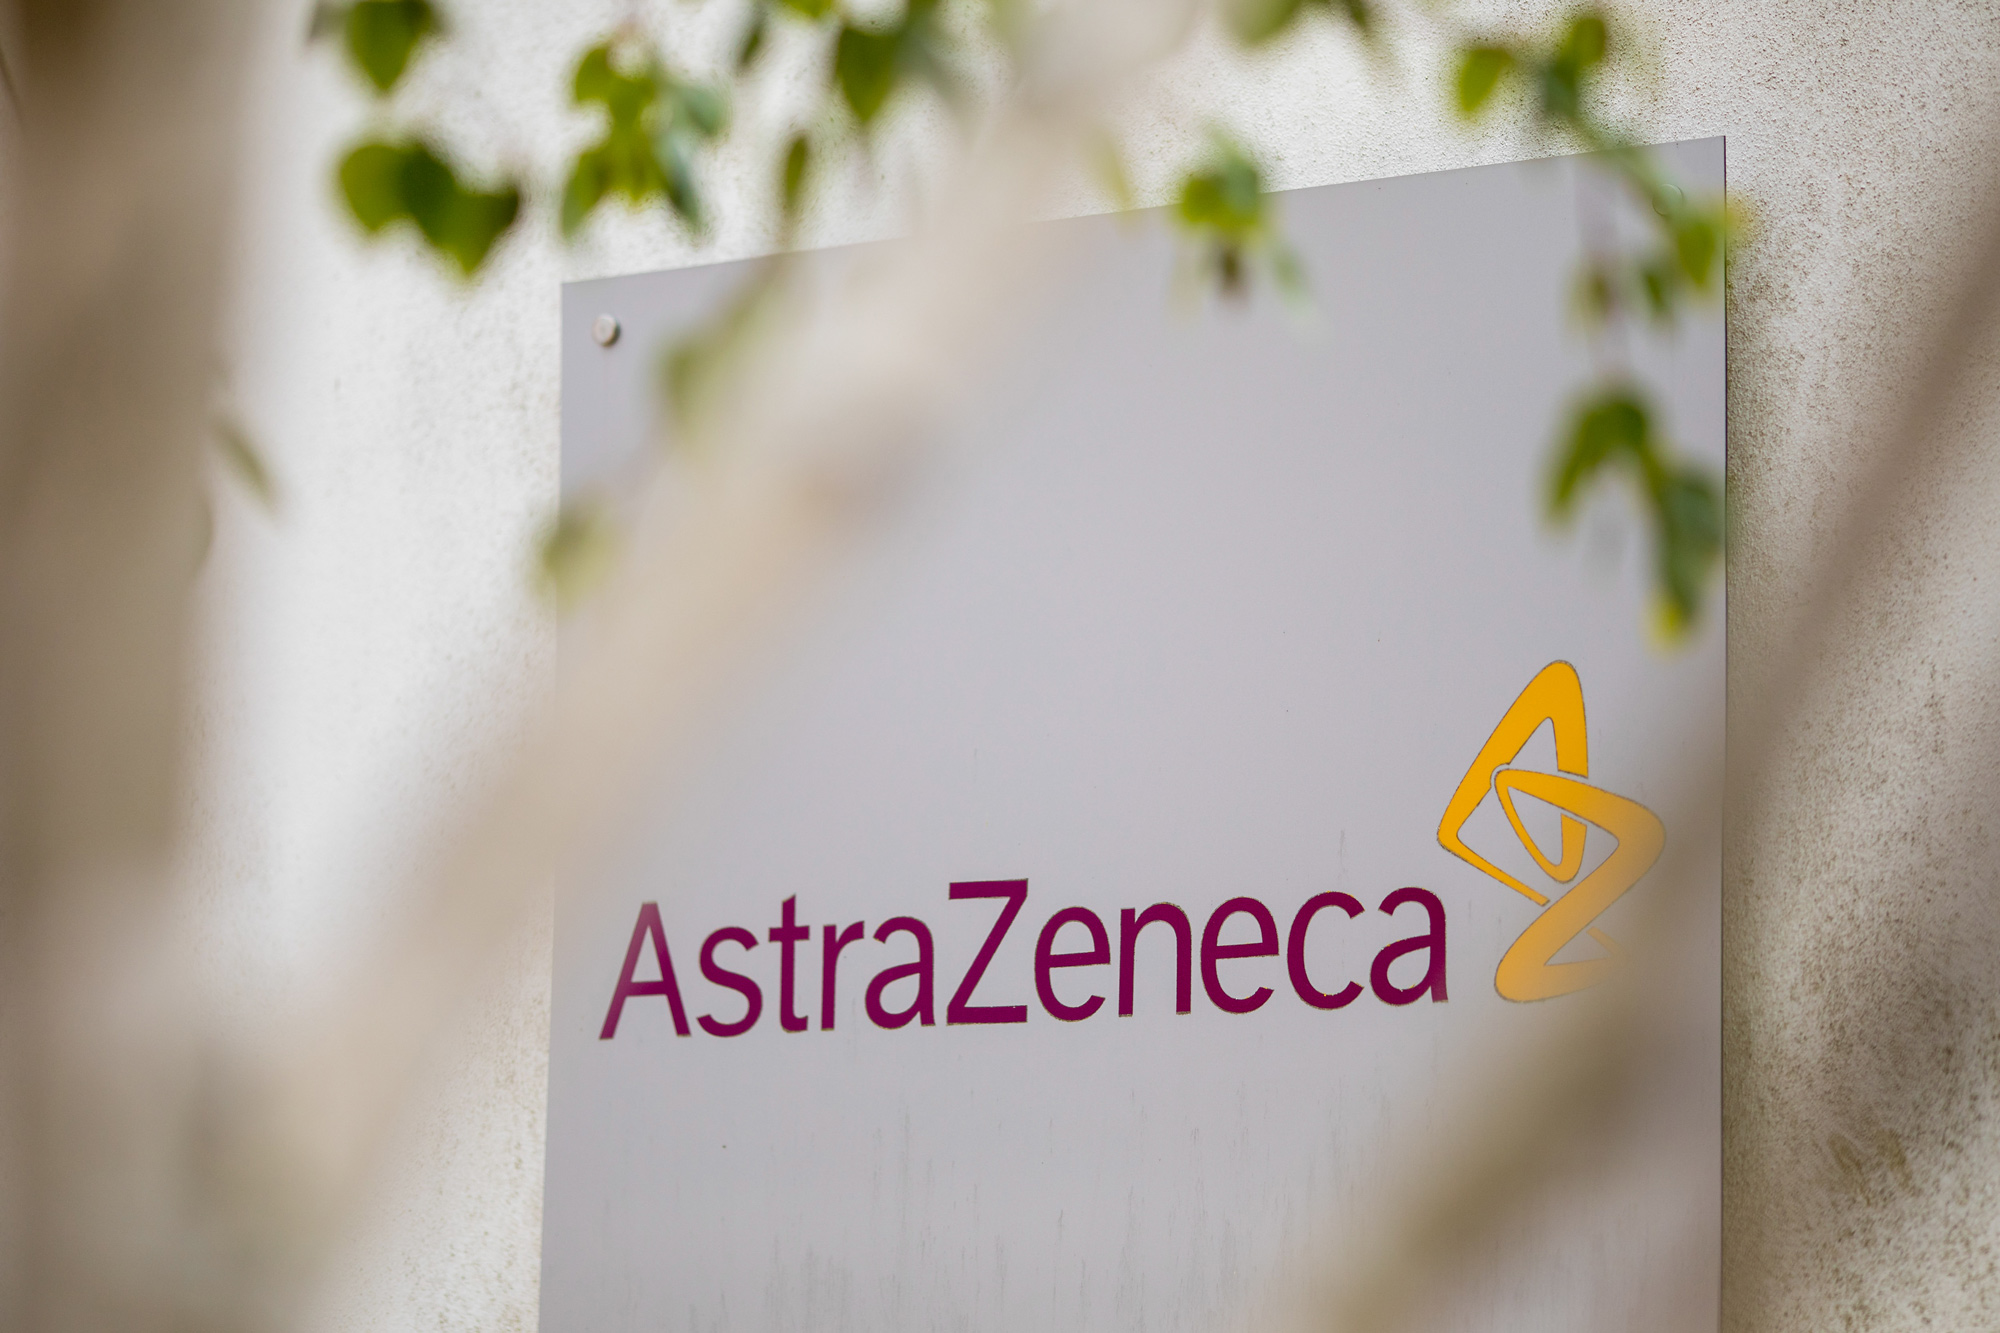 A sign featuring the AstraZeneca logo stands at the company's DaVinci building at the Melbourn Science Park in Cambridge, U.K., on June 8.